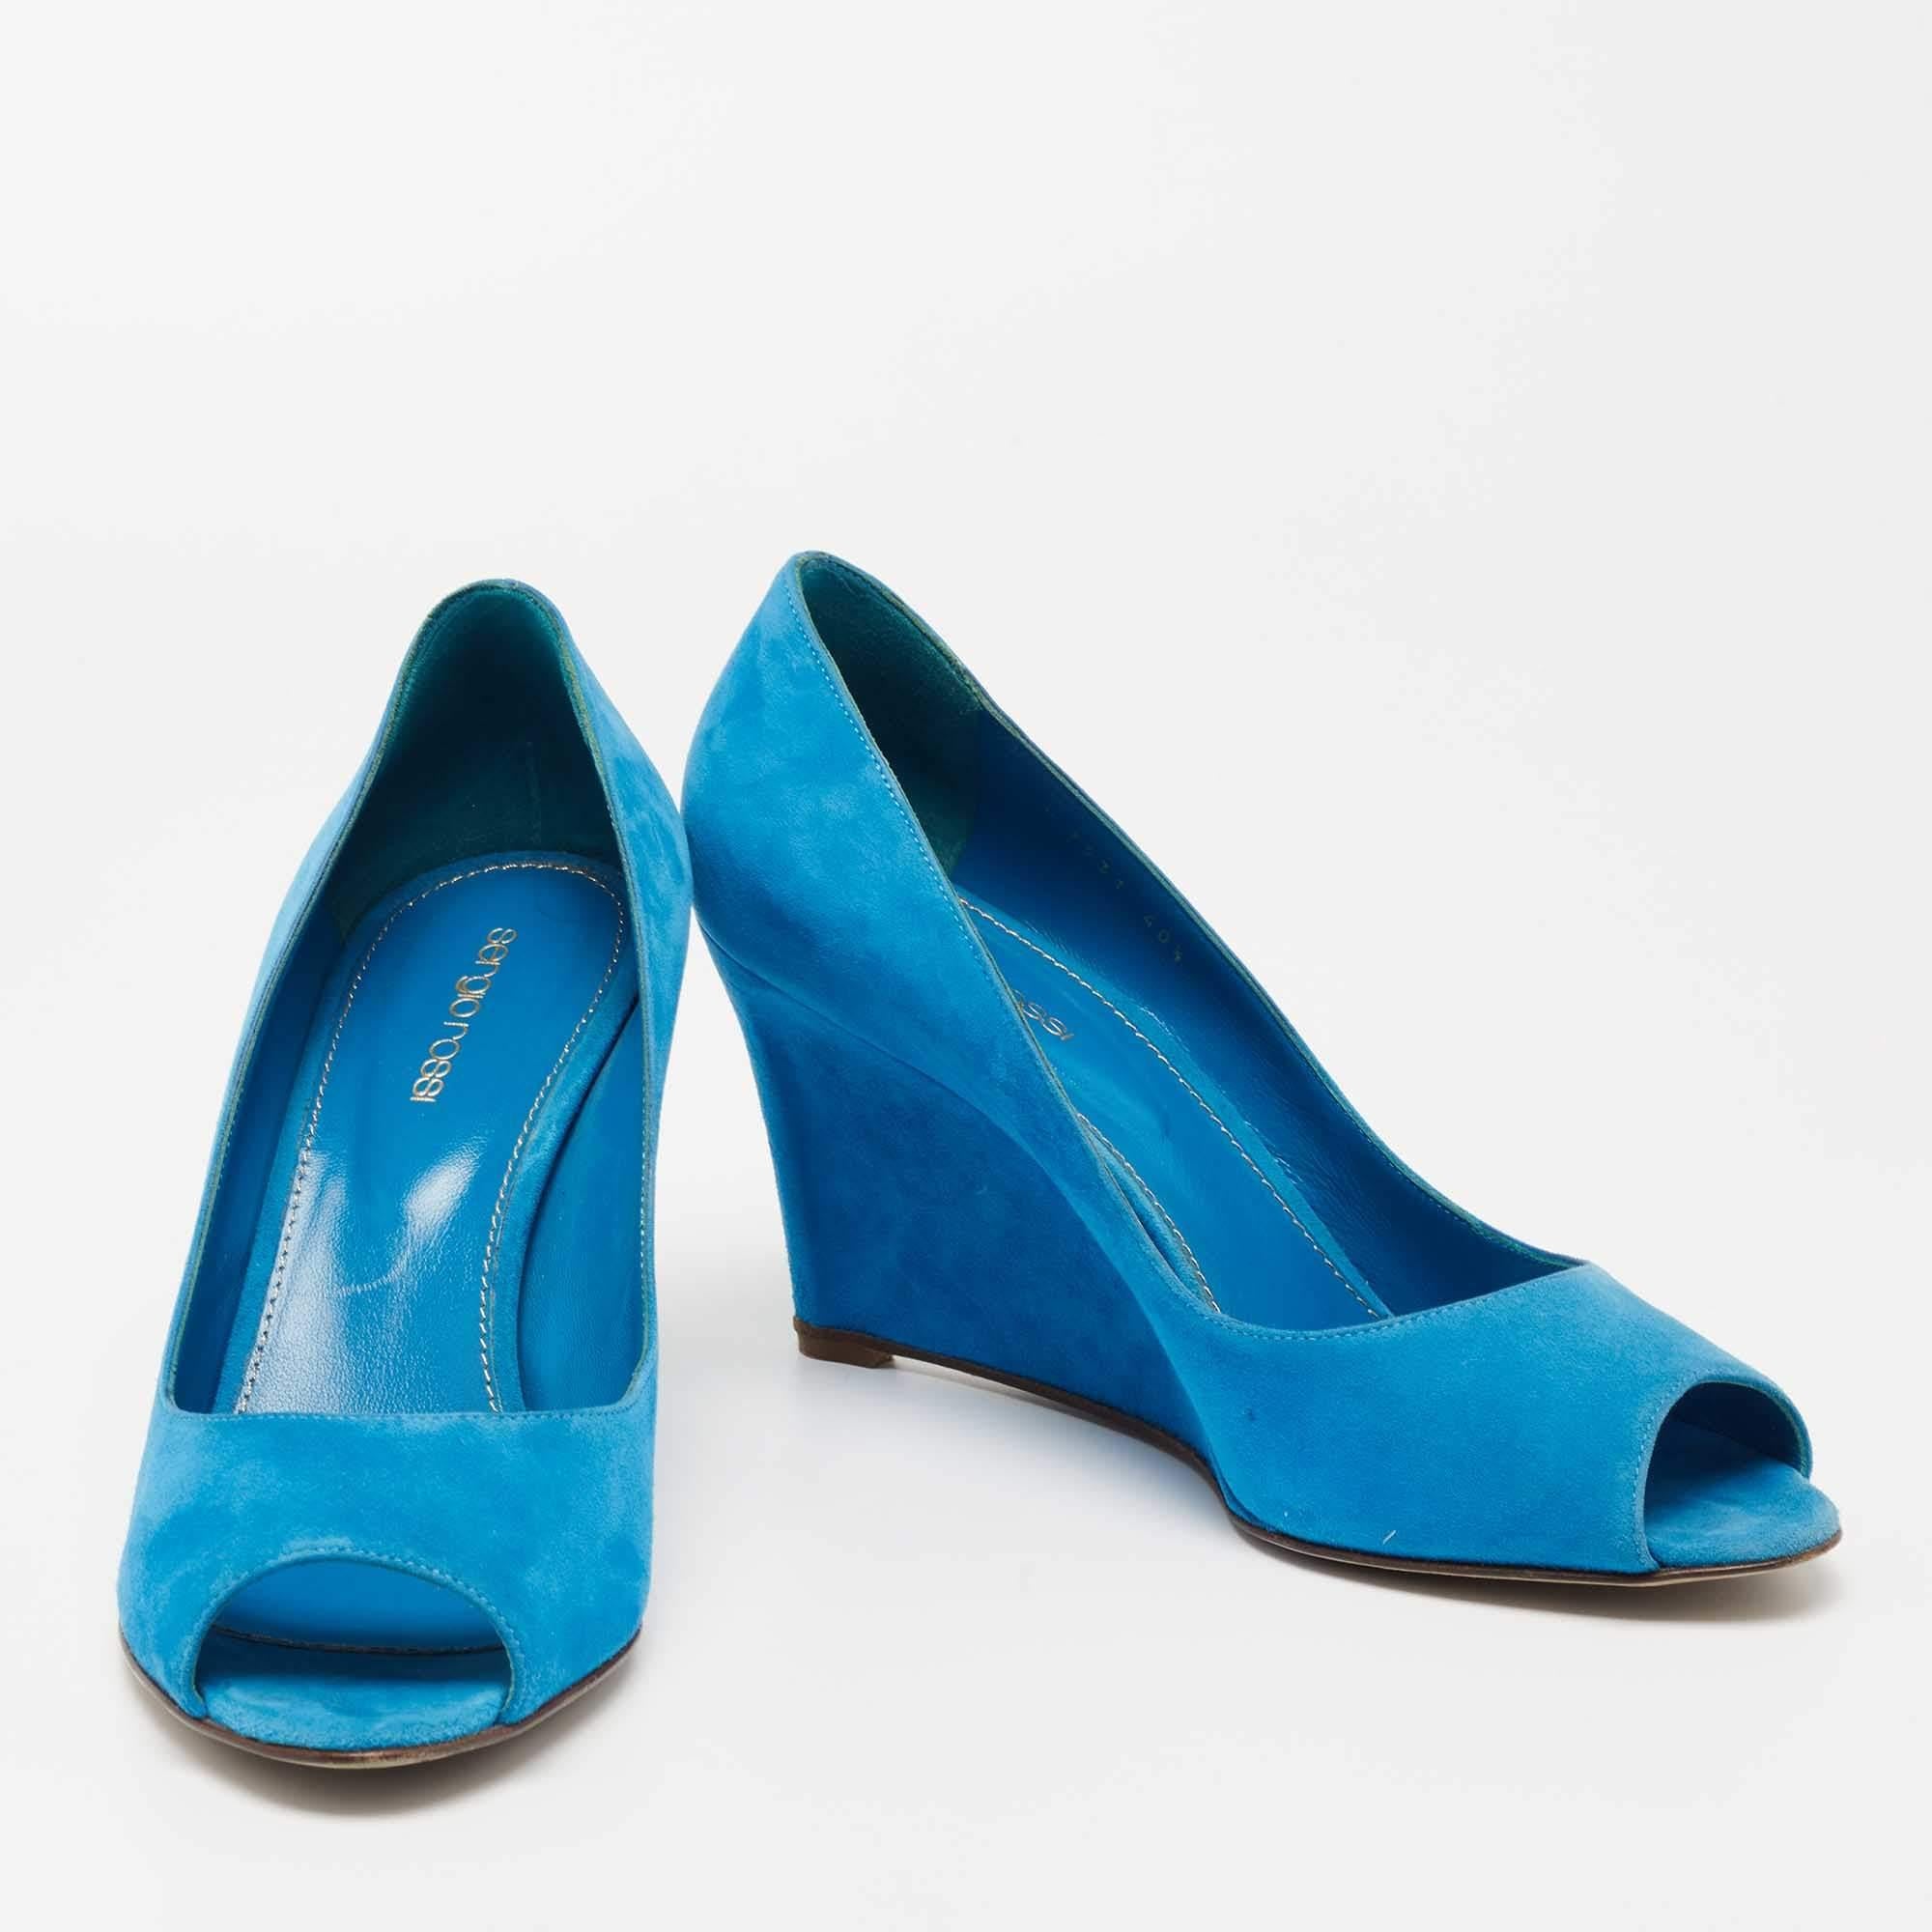 Sergio Rossi Blue Suede Peep Toe Wedge Pumps Size 40.5 For Sale 1